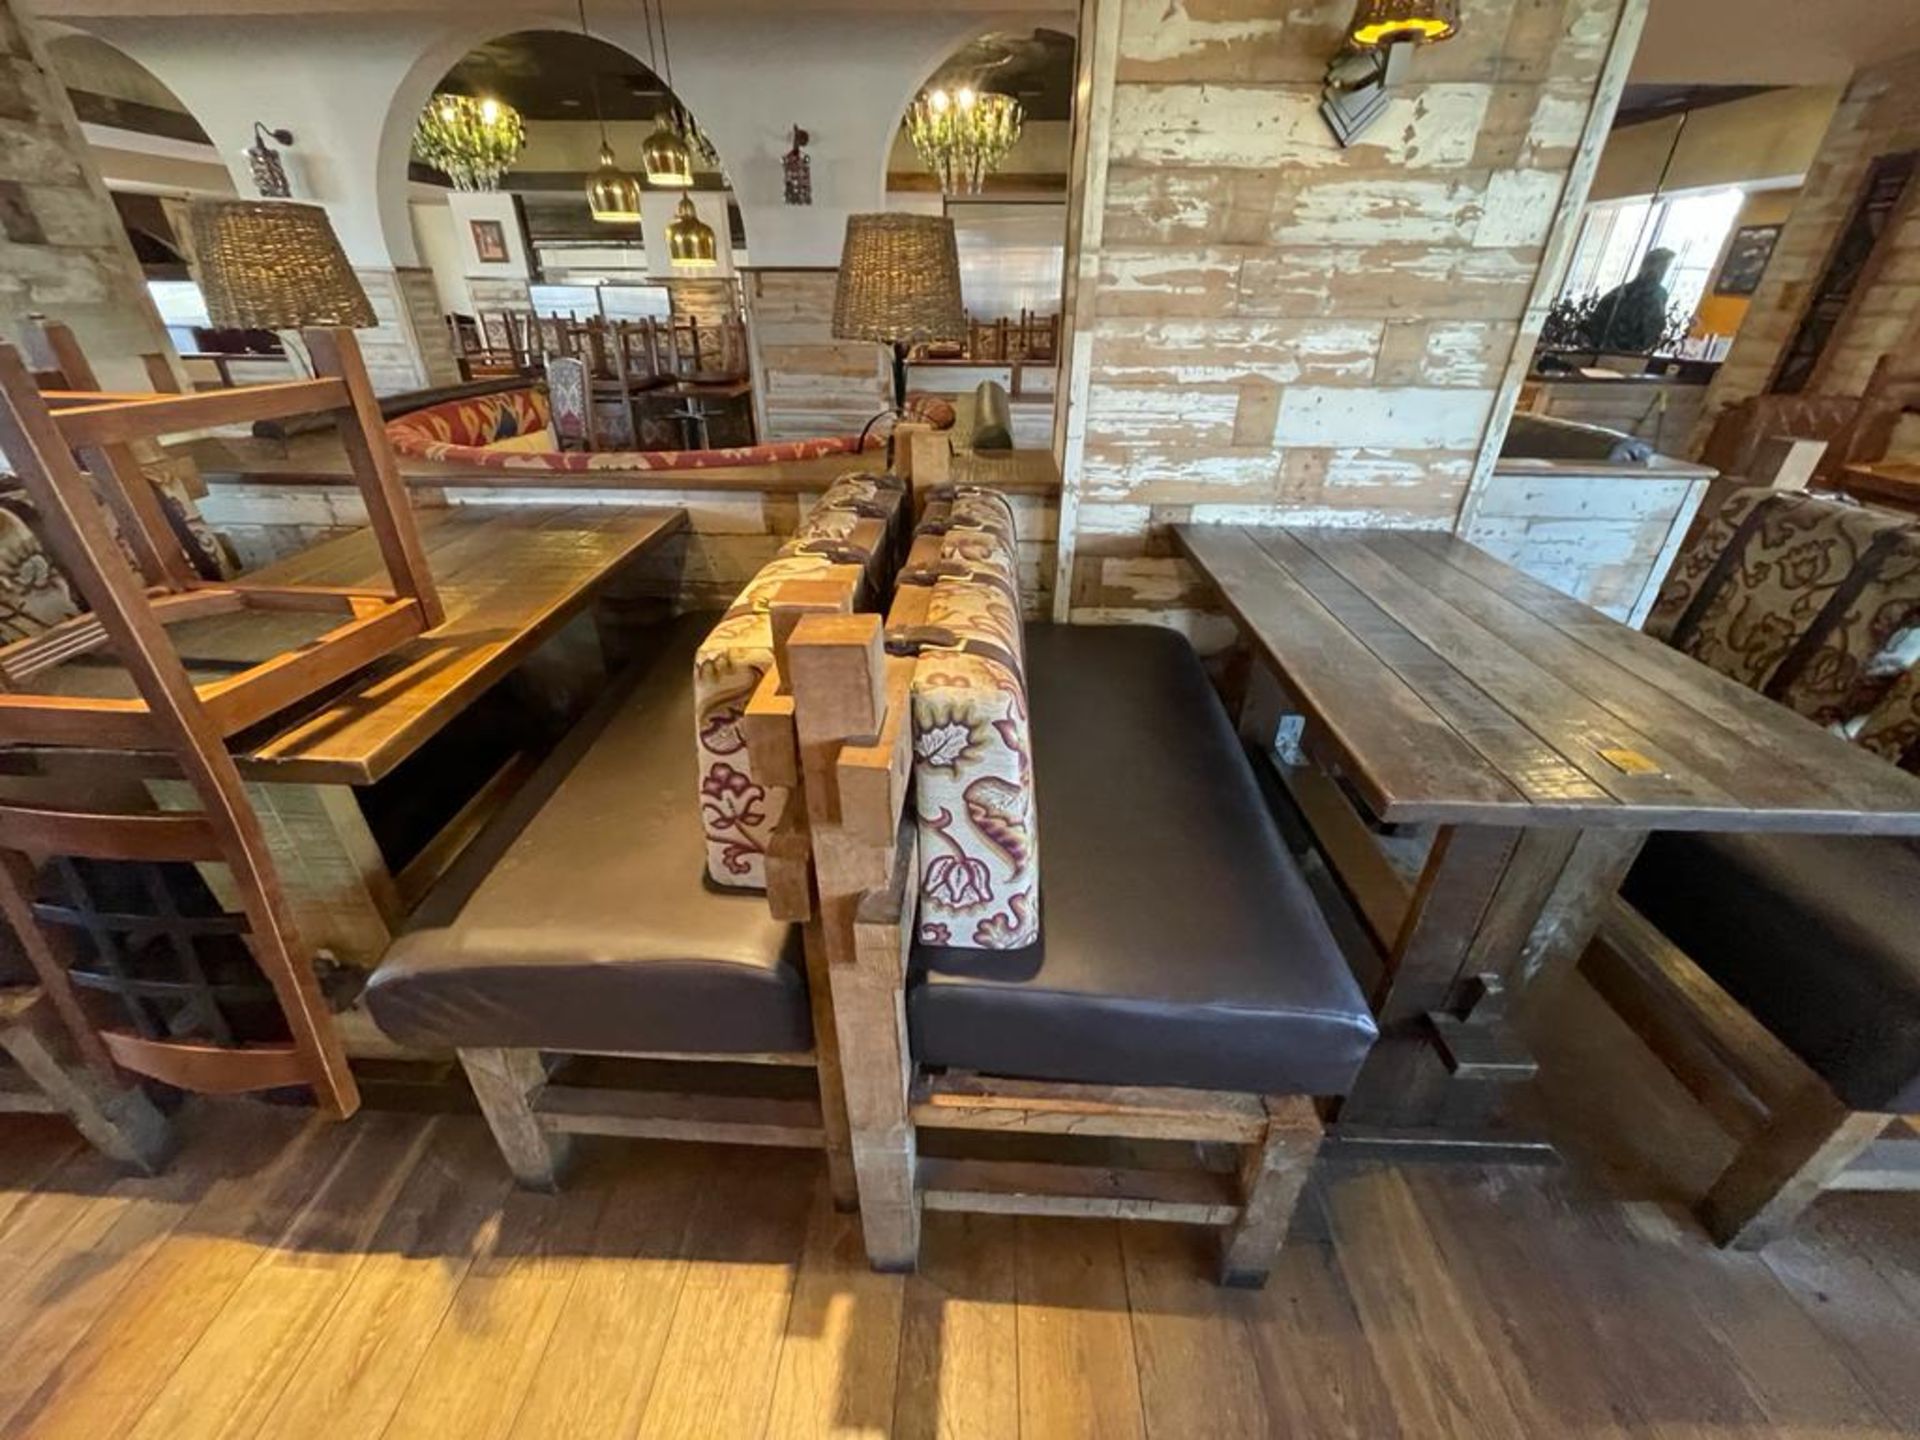 2 x Rustic Seating Benches Featuring Timber Frames, Brown Faux Leather Seat Pads and Floral Fabric - Image 11 of 13